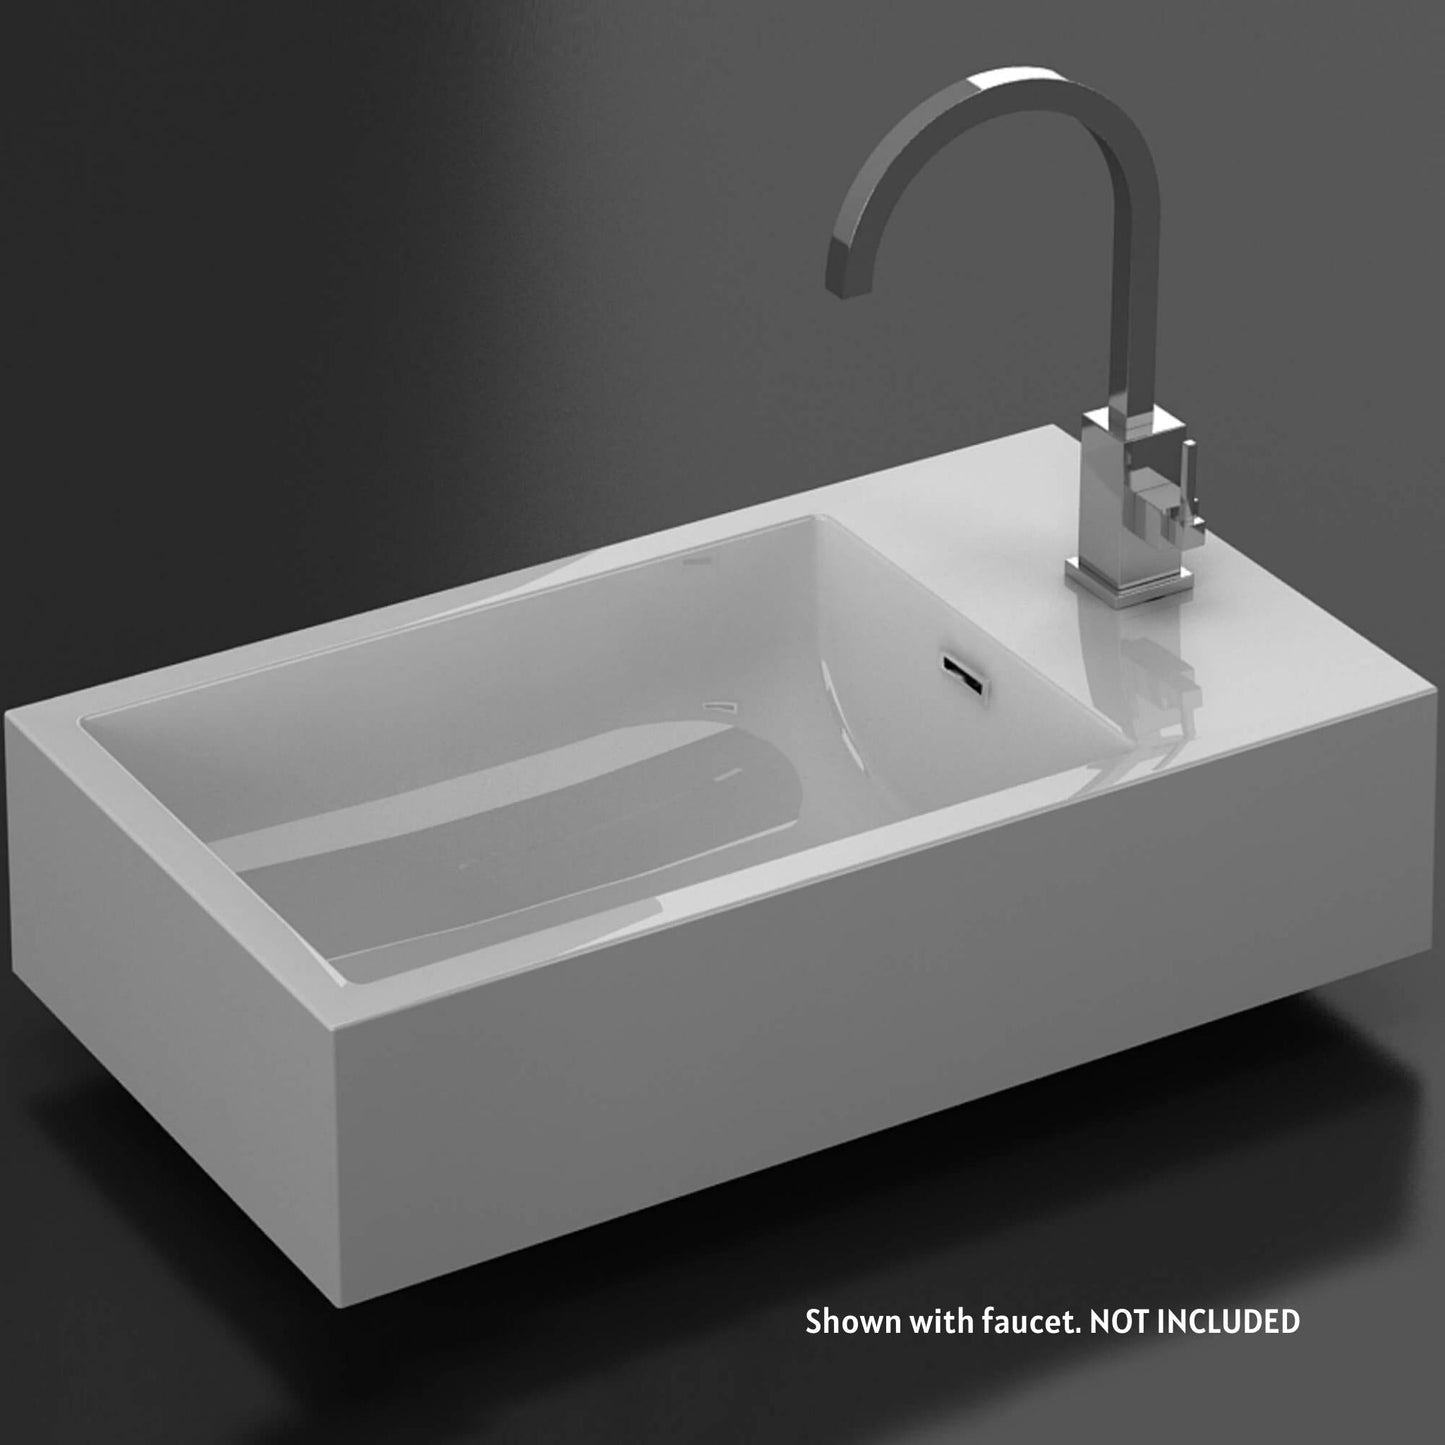 Blossom Colmar 18" x 10" White Rectangular Acrylic Vanity Top With Integrated Single Sink and Overflow